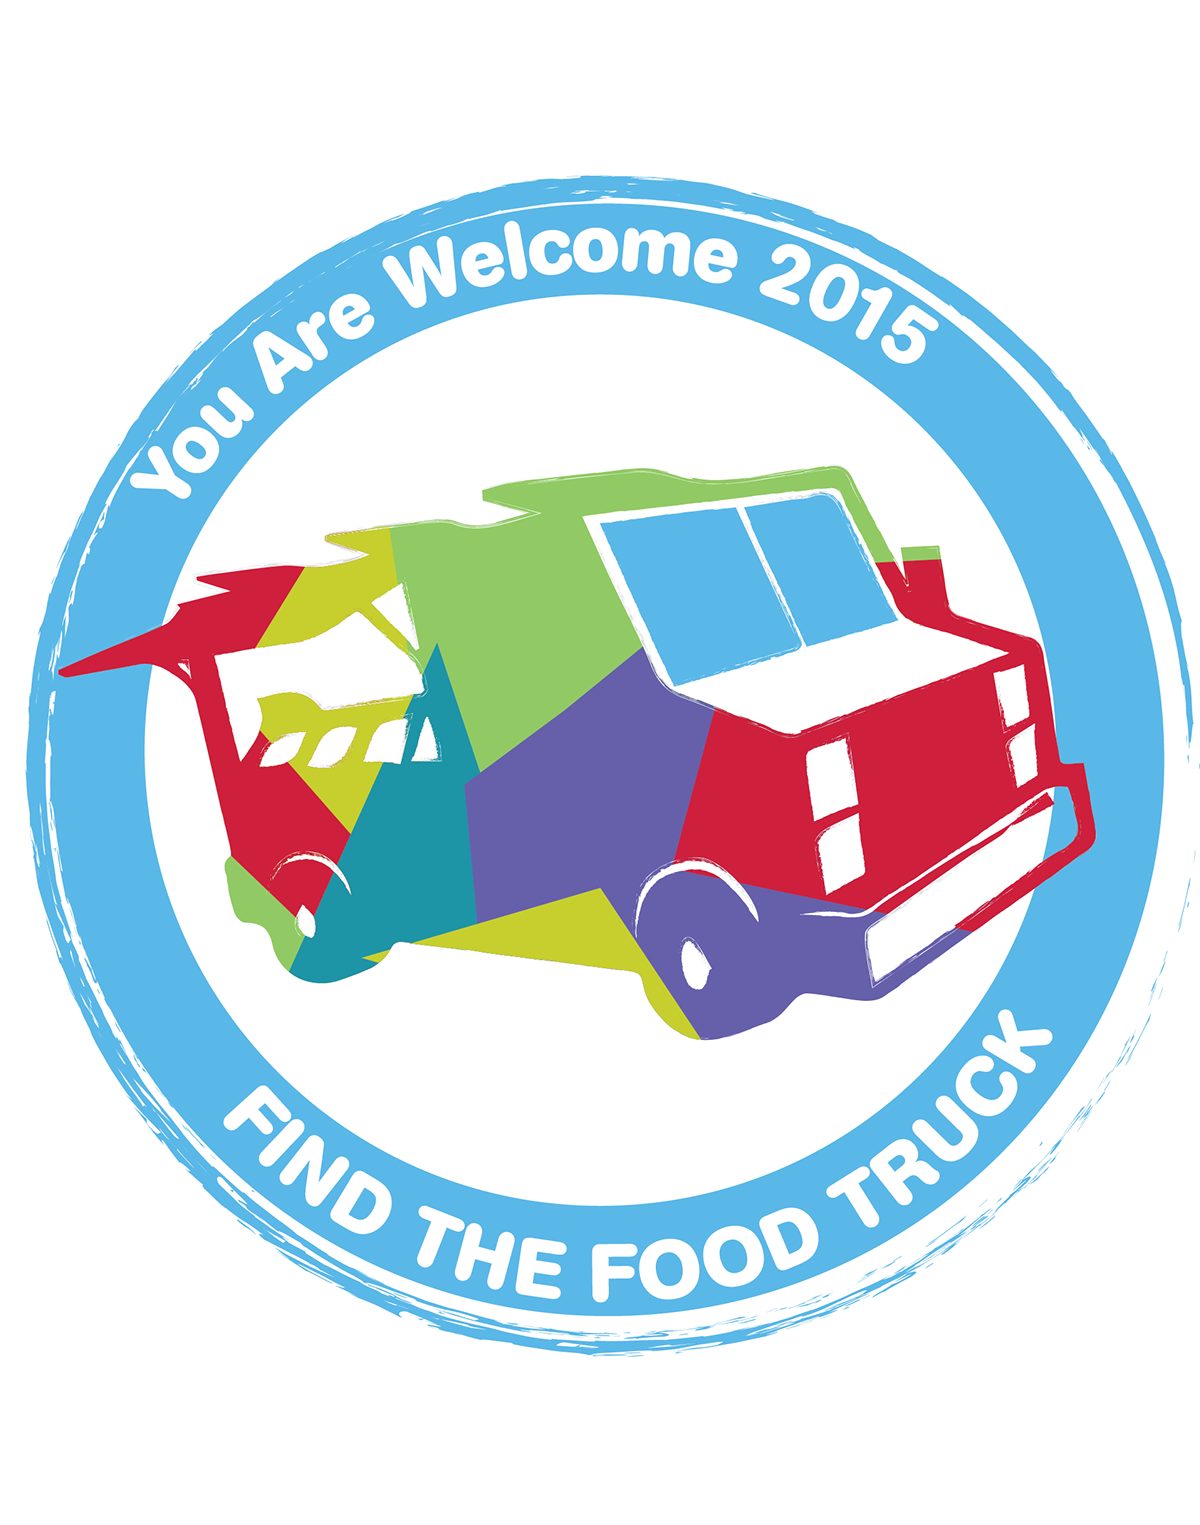 campaign Food truck digital first nation Toronto pan am Games welcome host nation Ojibway